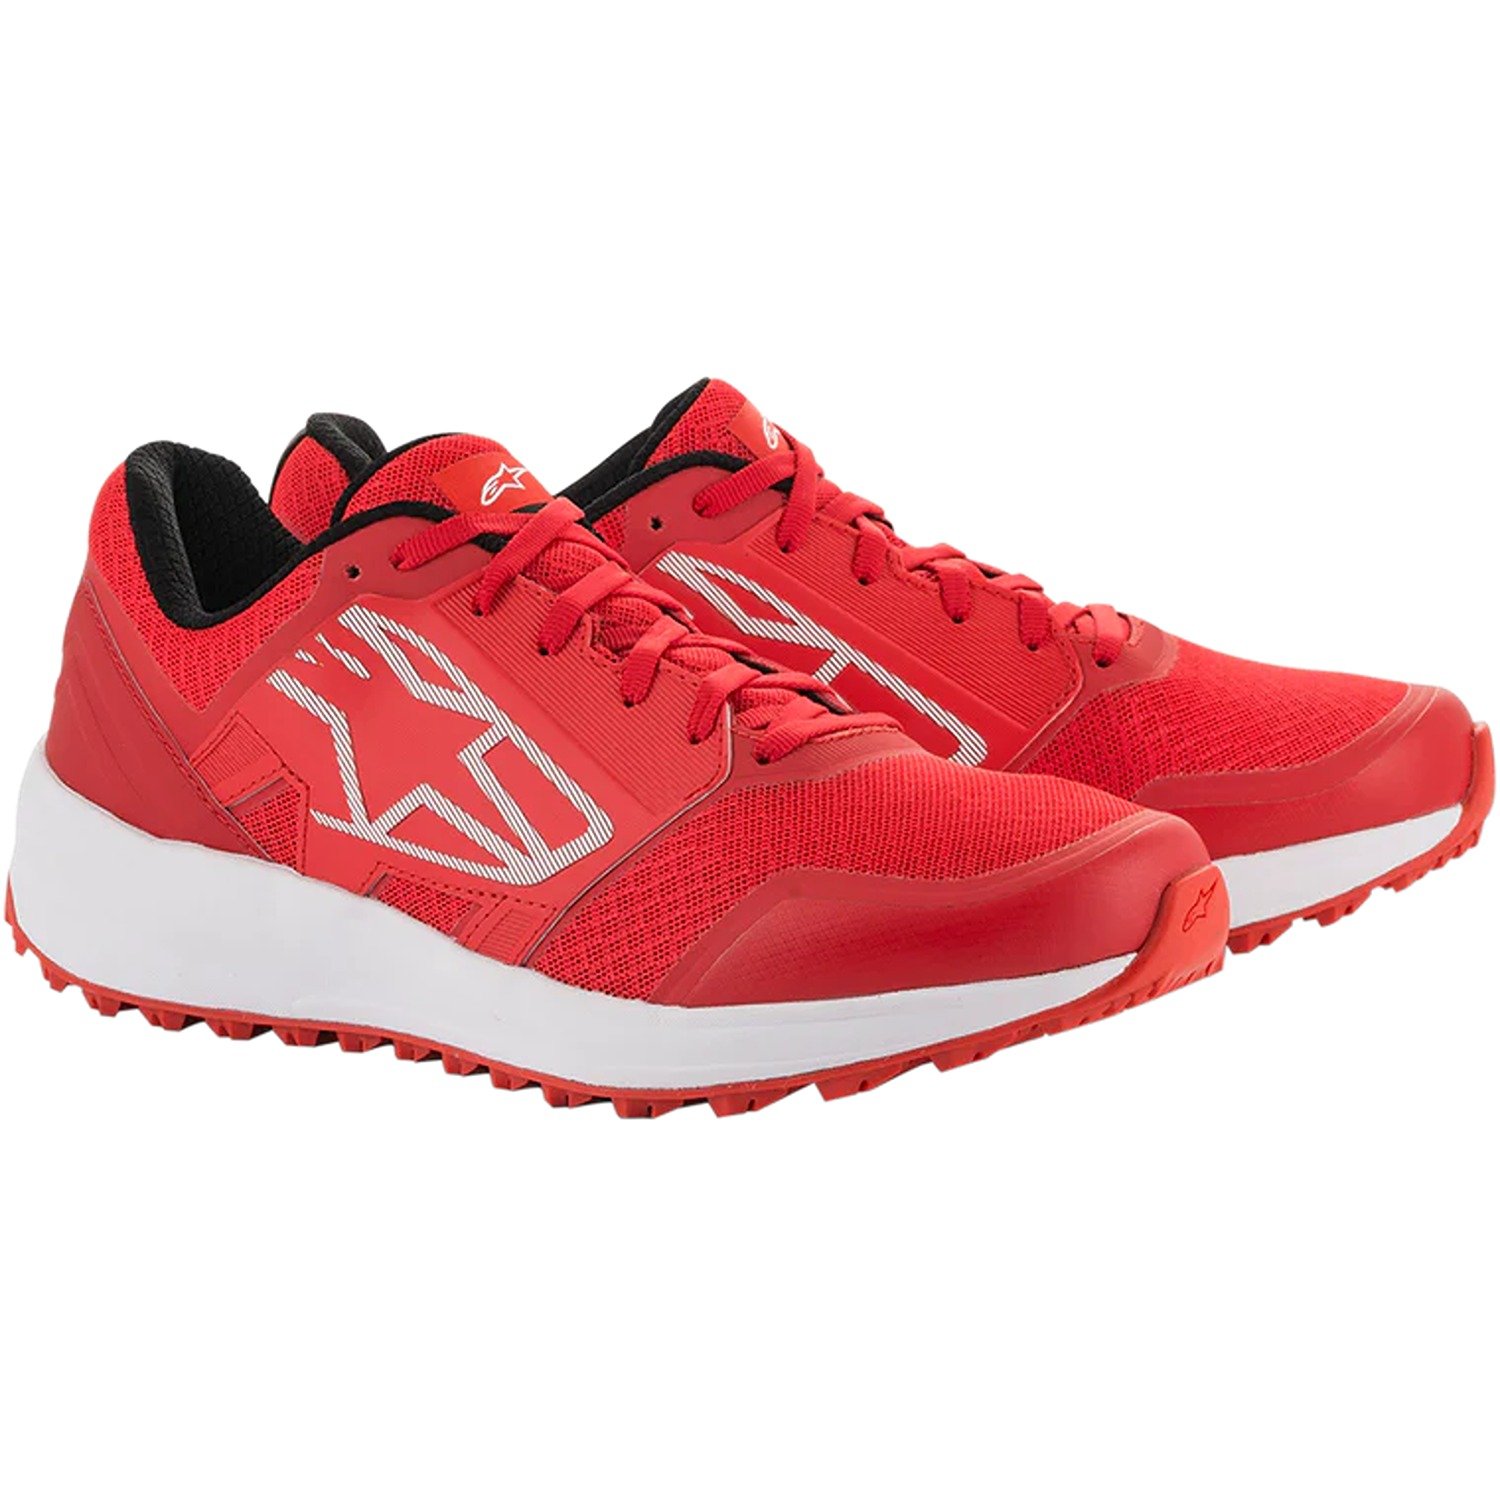 Image of Alpinestars Meta Trail Shoes Red White Taille US 12